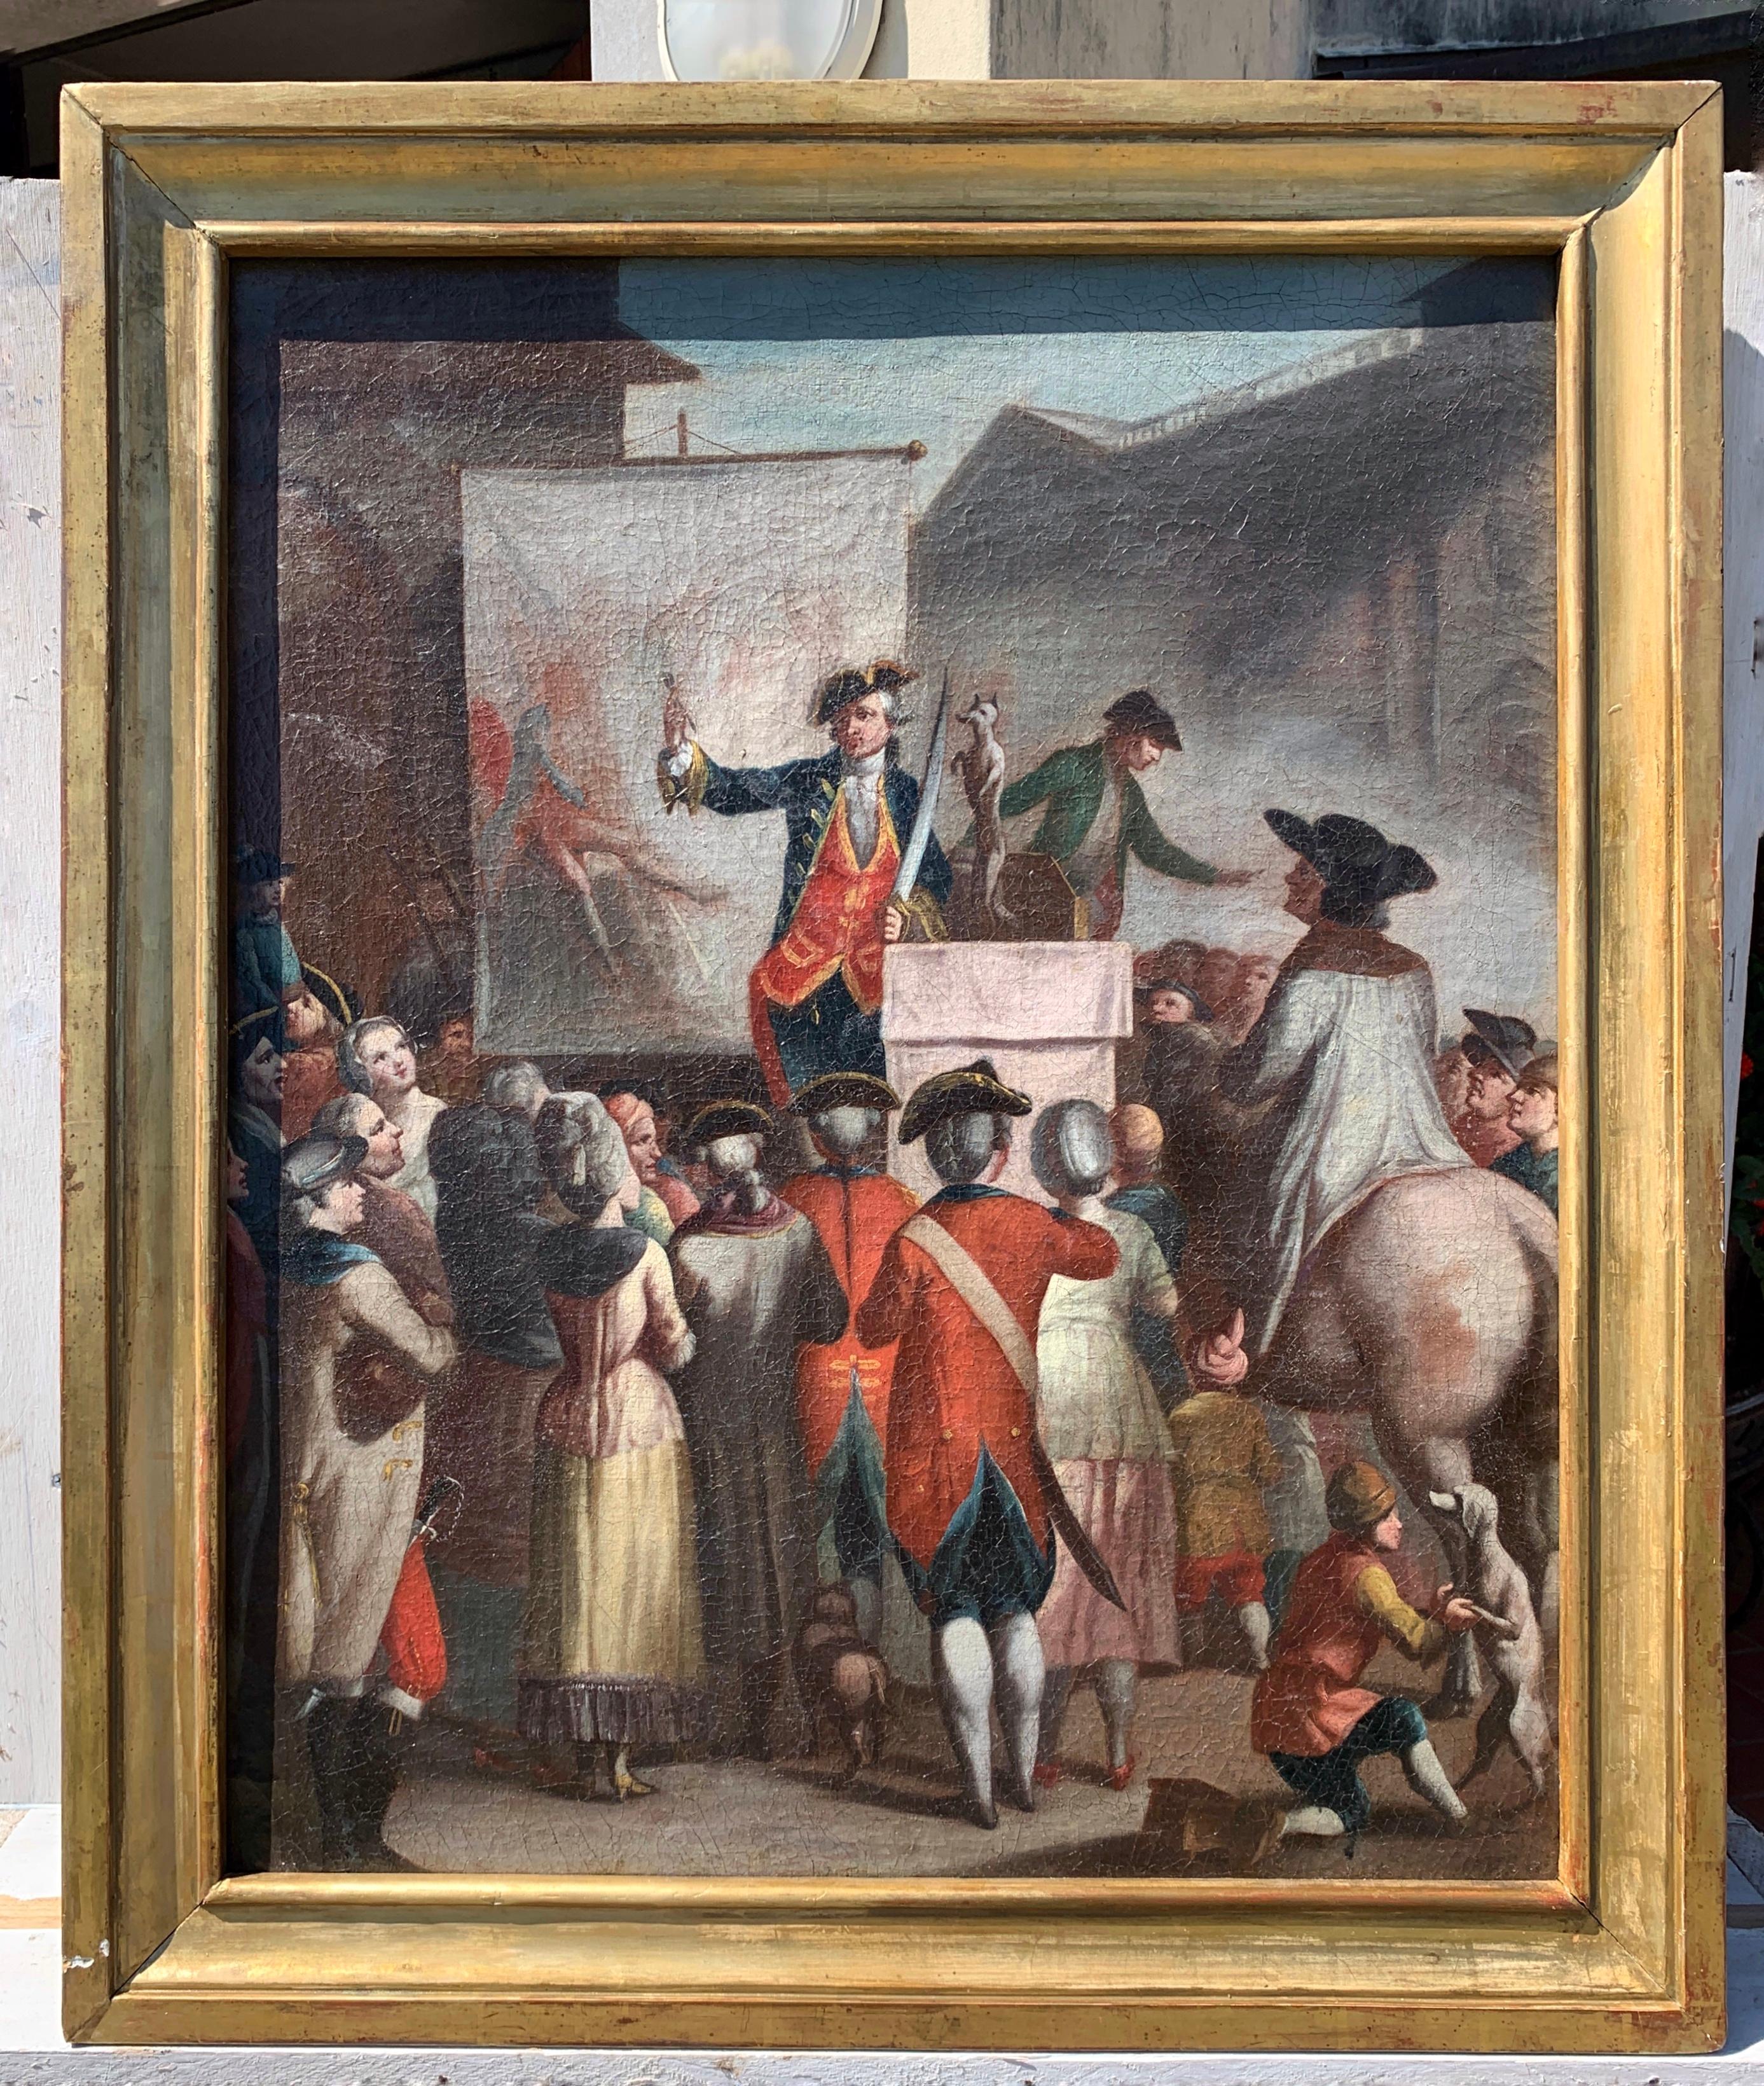 Carnival painter (Italian school)- 18th century figure painting - Street show - Painting by Unknown